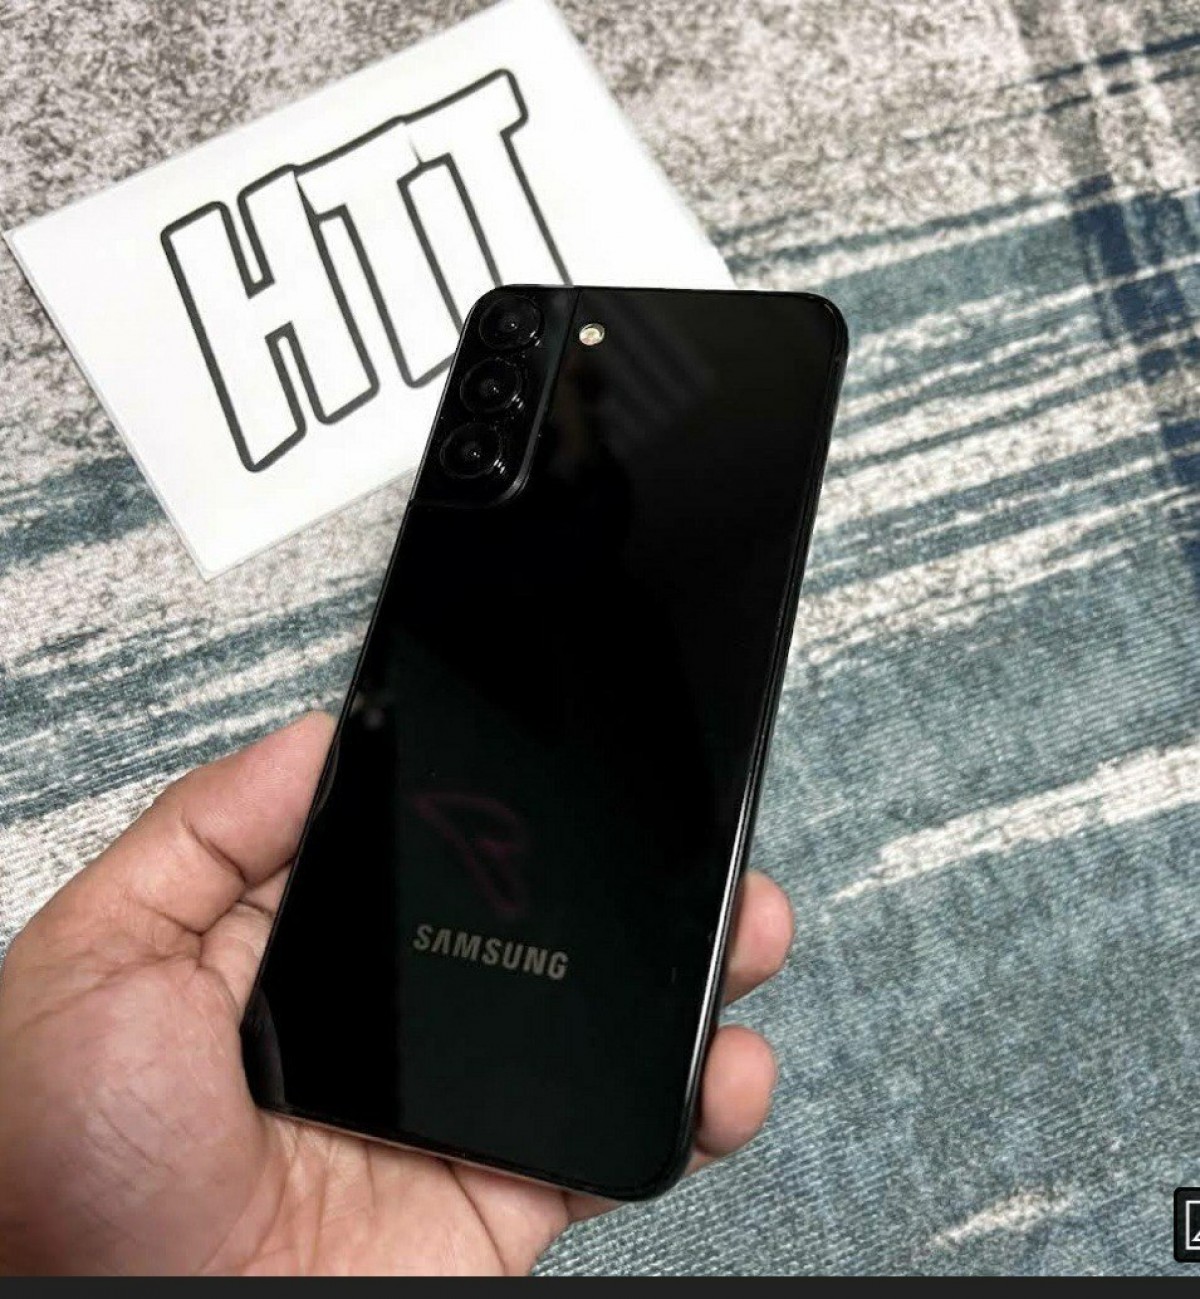 Samsung Galaxy S22 appears in live photos, S22 Ultra gets certified by FCC